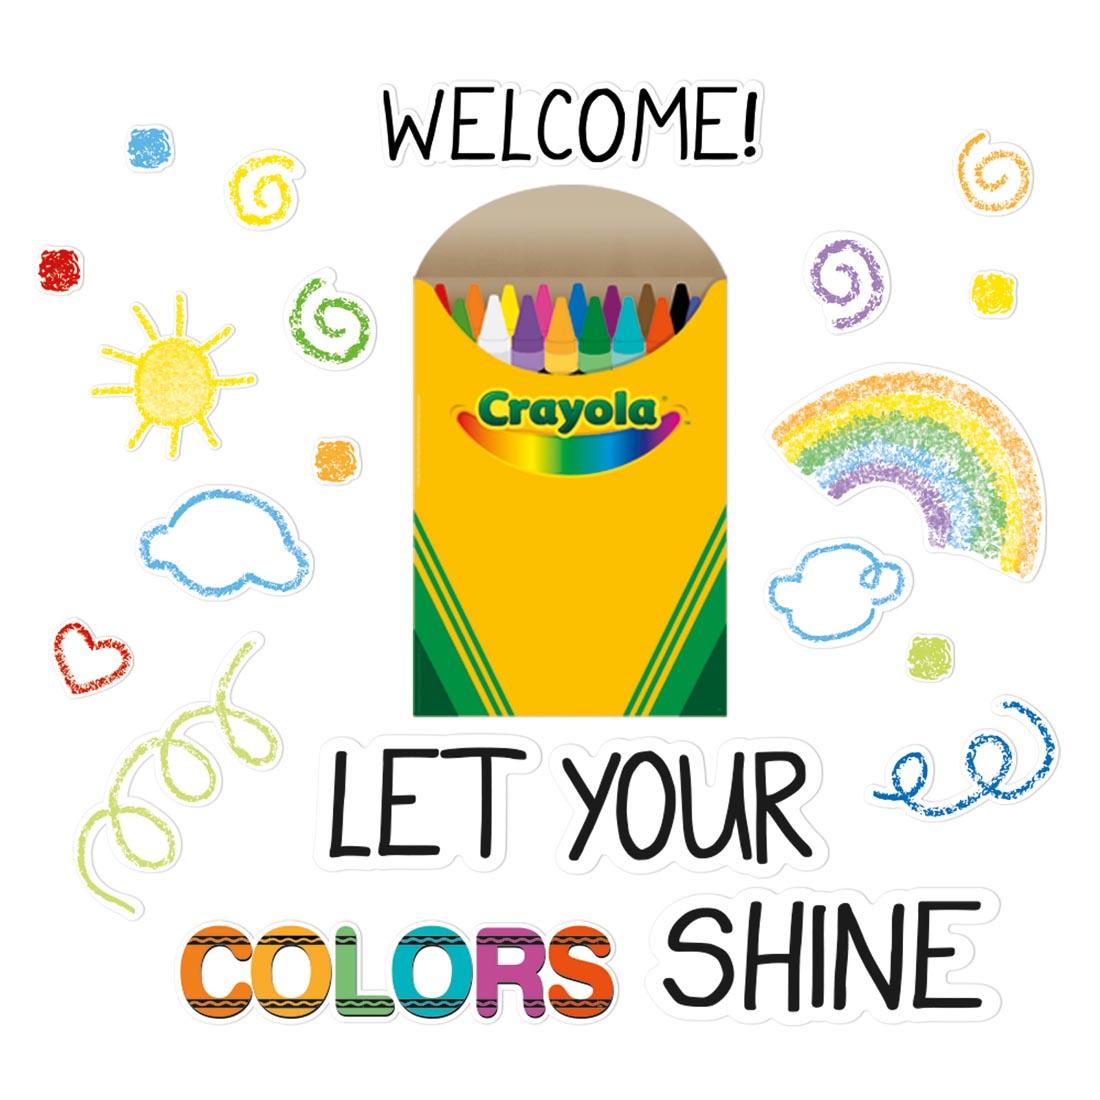 Let Your Colors Shine Bulletin Board Set From The Crayola Collection By Eureka